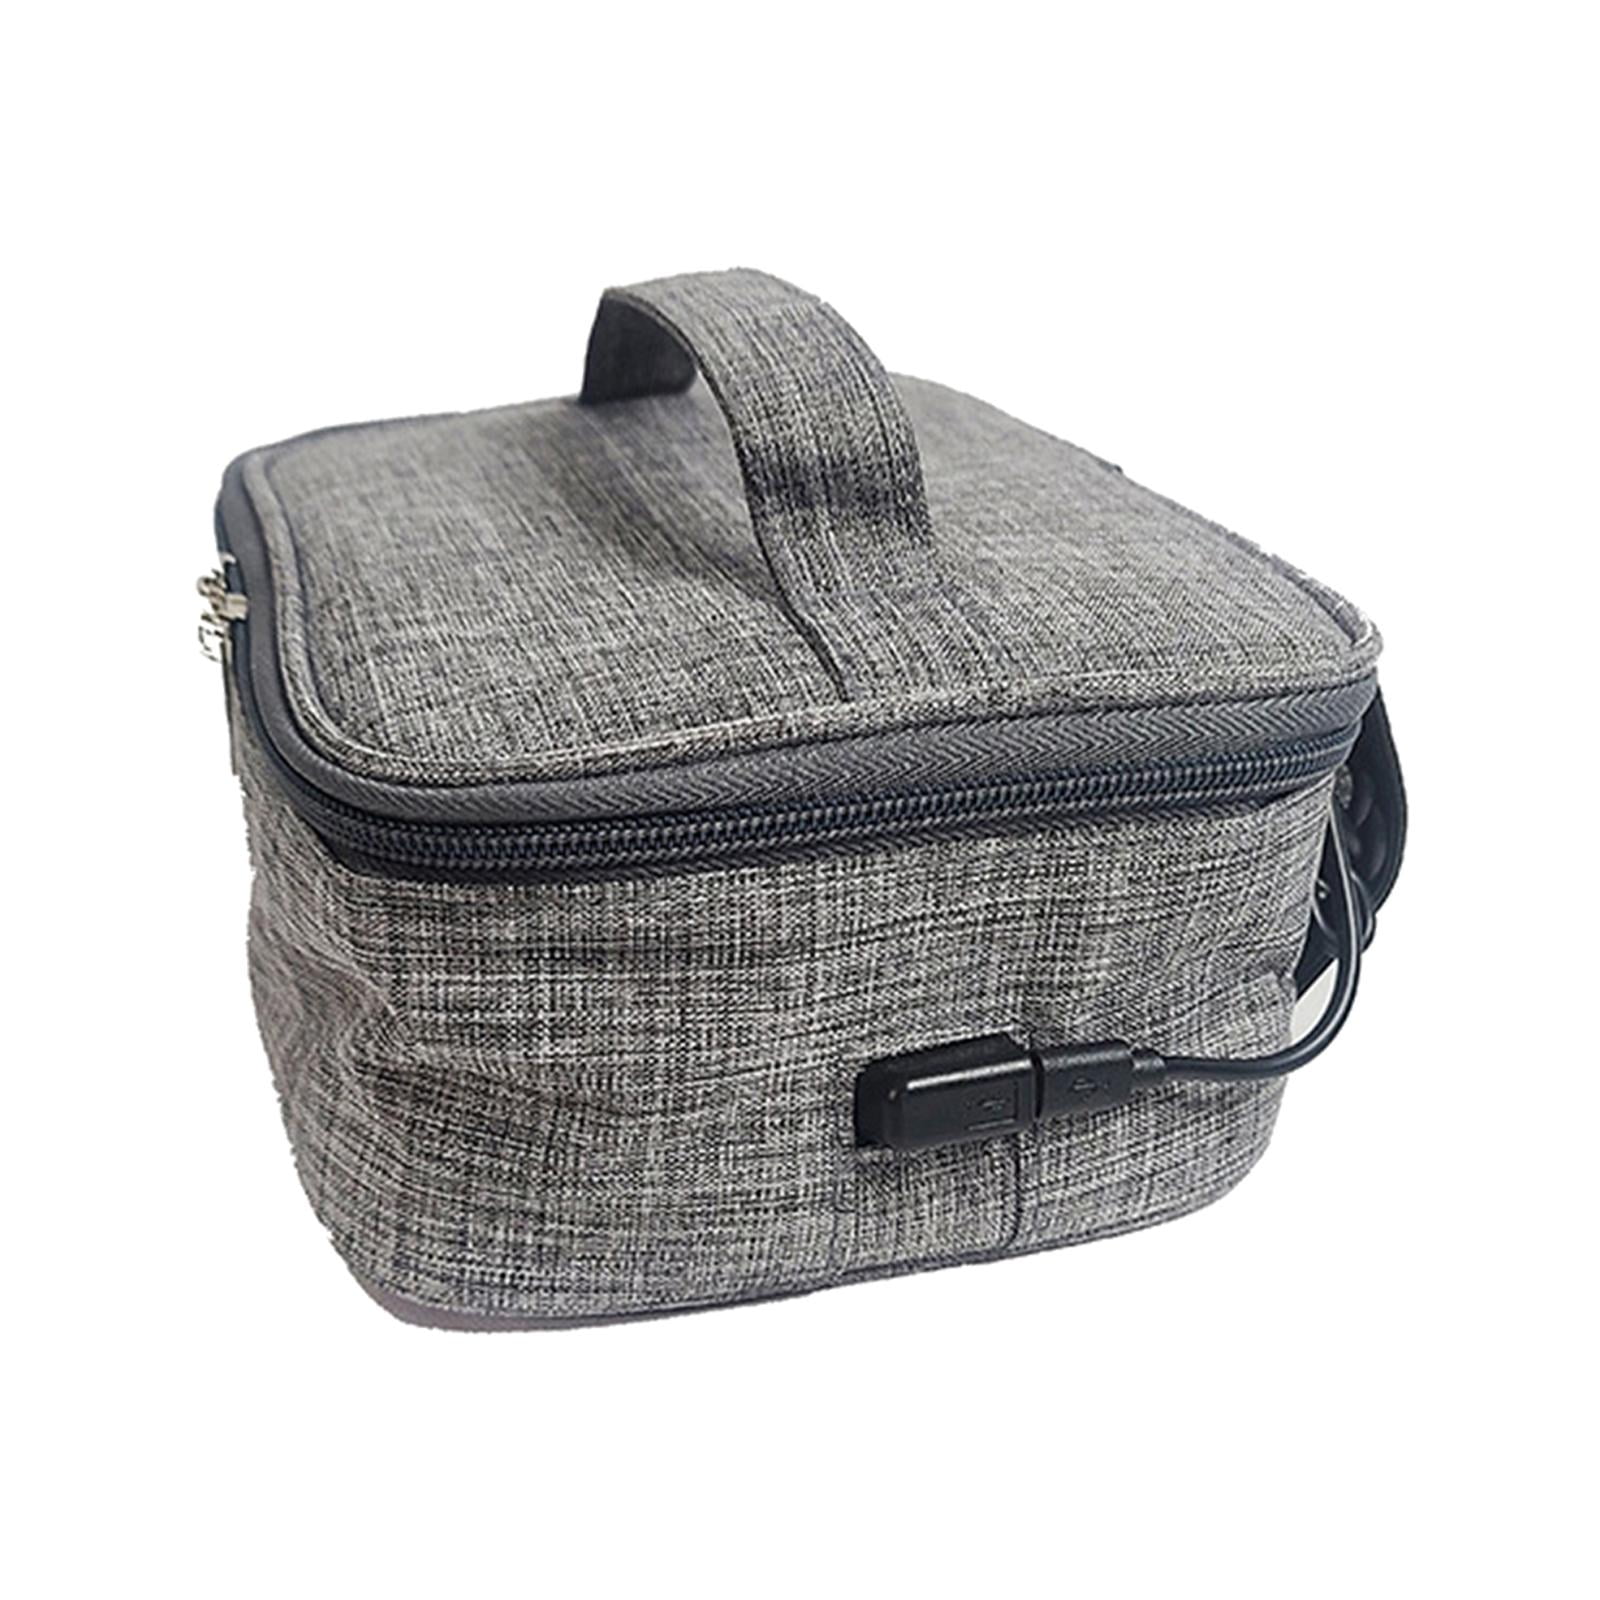 USB Portable Food Warmer and Heater Lunch Bag, Waterproof Oxford Cloth  Electric Lunch Box Bag Lunch Box Warmer for Office Travel for Outdoor  Picnic